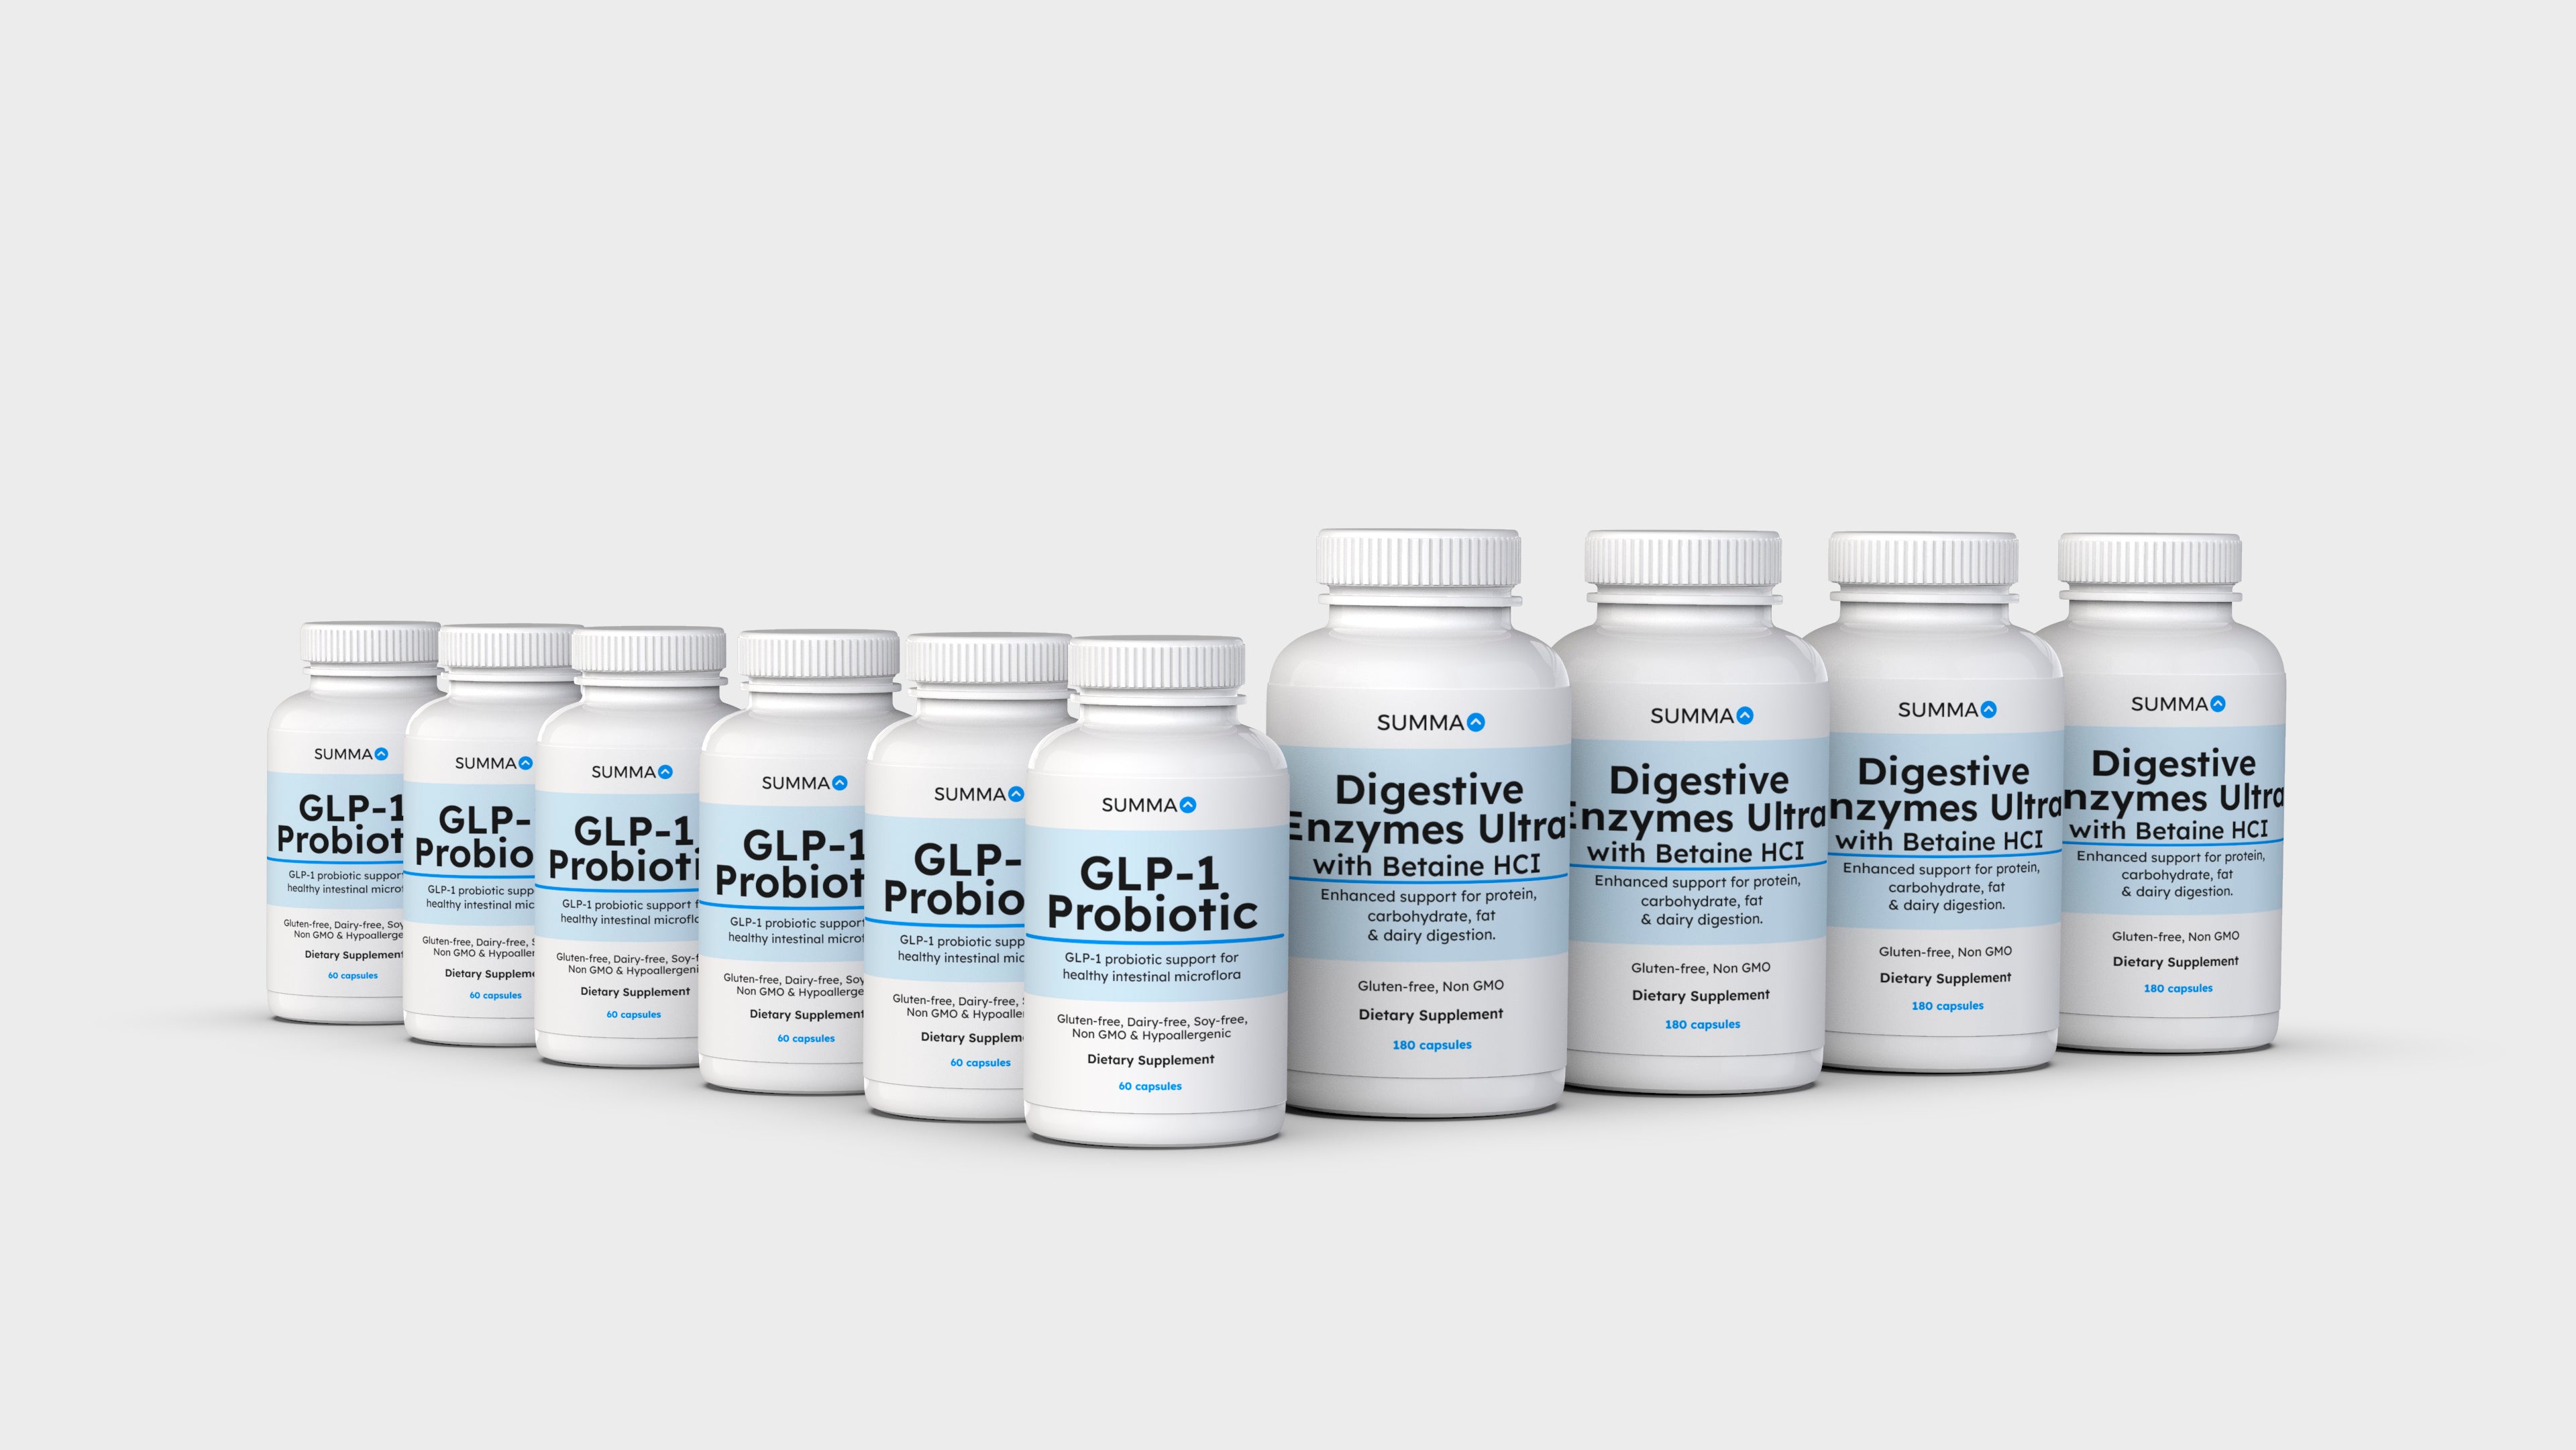 LeanGut: Glp-1 Probiotic + Digestive Enzymes with Betaine HCL